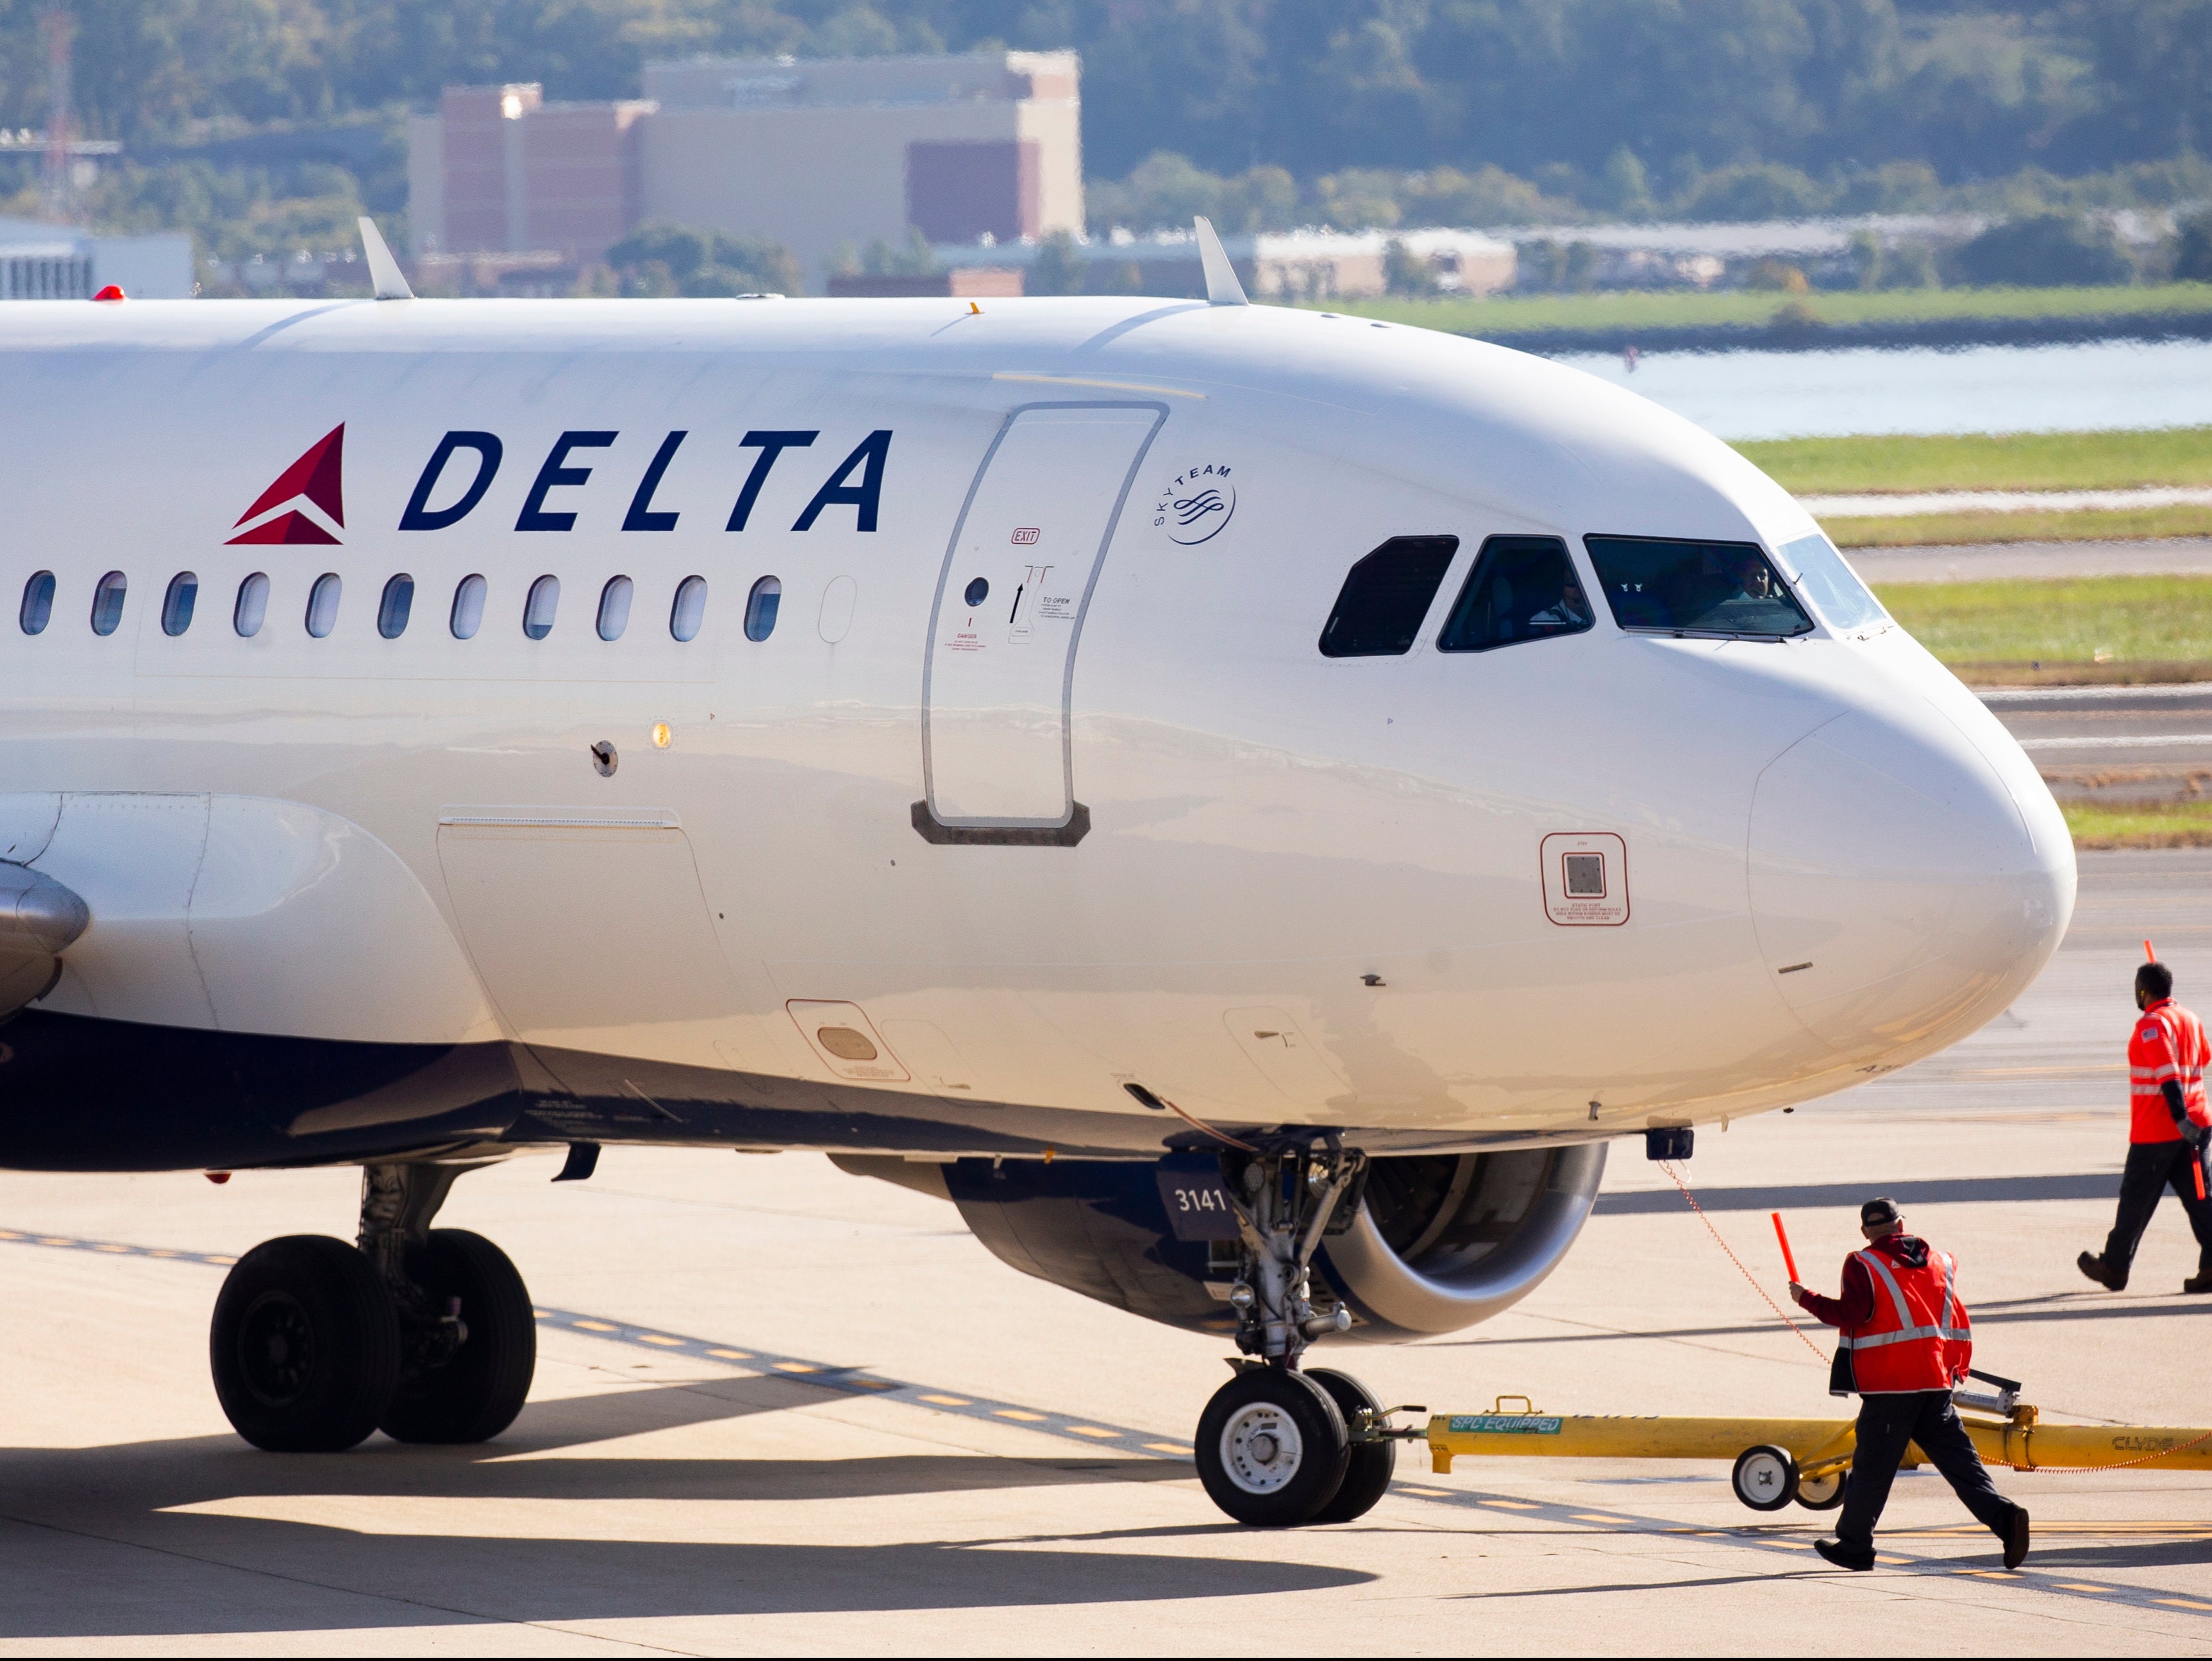 Delta is partnering with the CDC